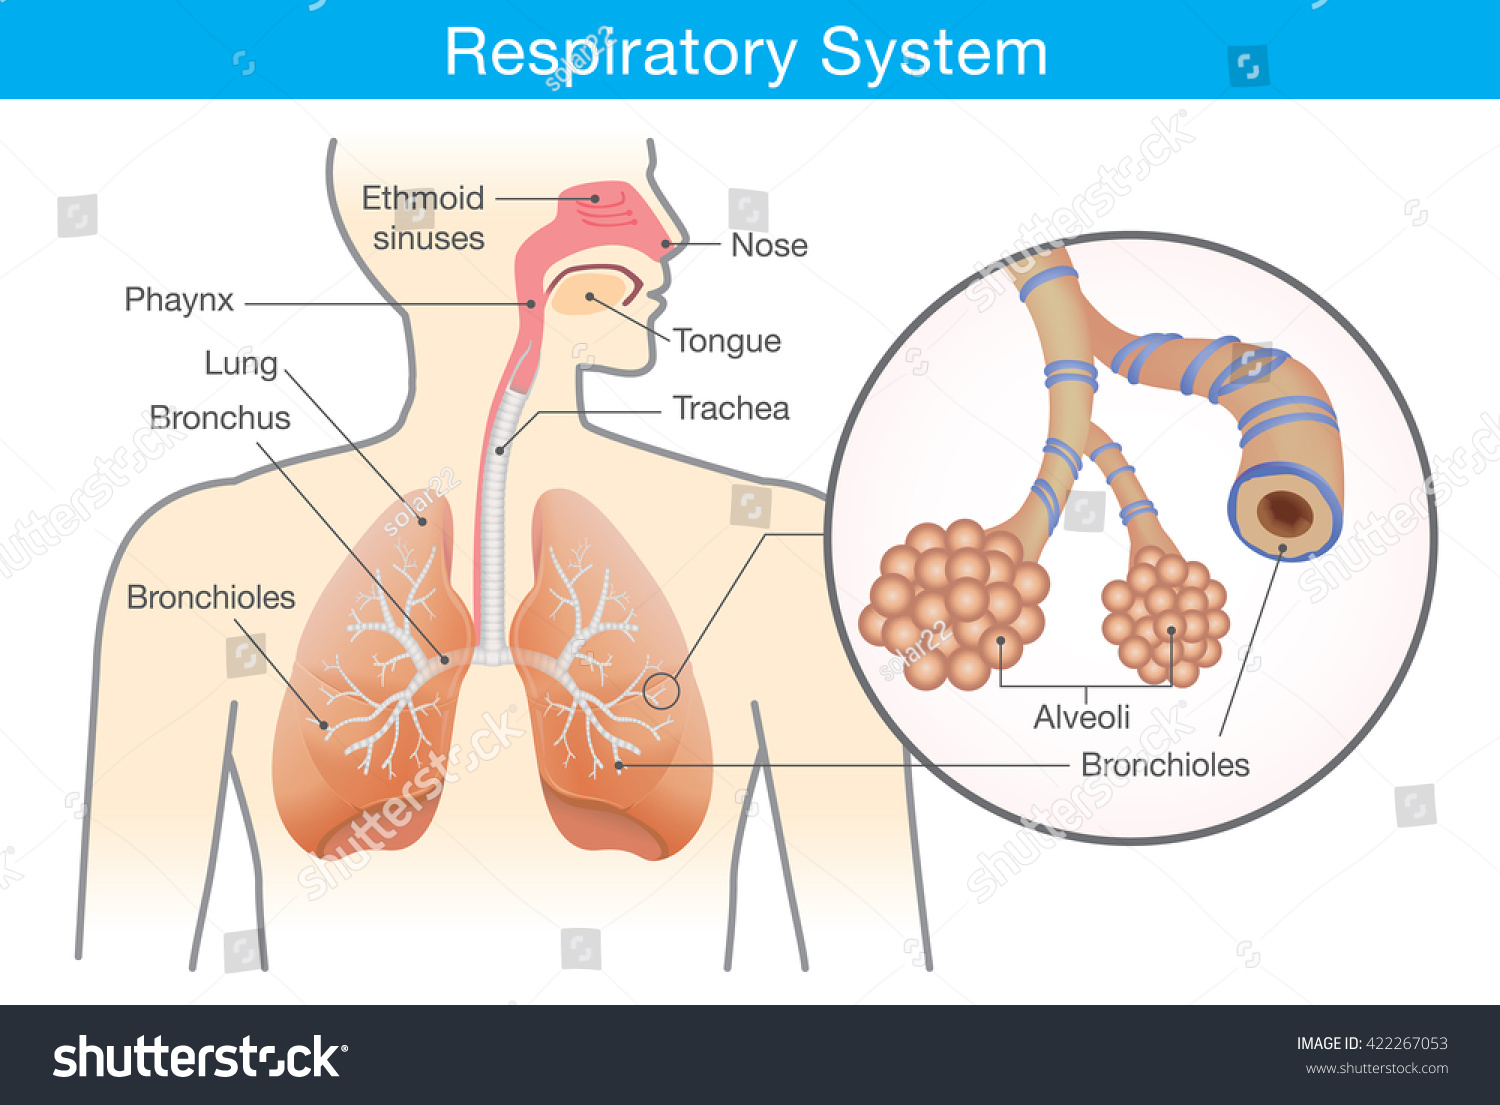 Respiratory System Human This Illustration About Stock Vector 422267053